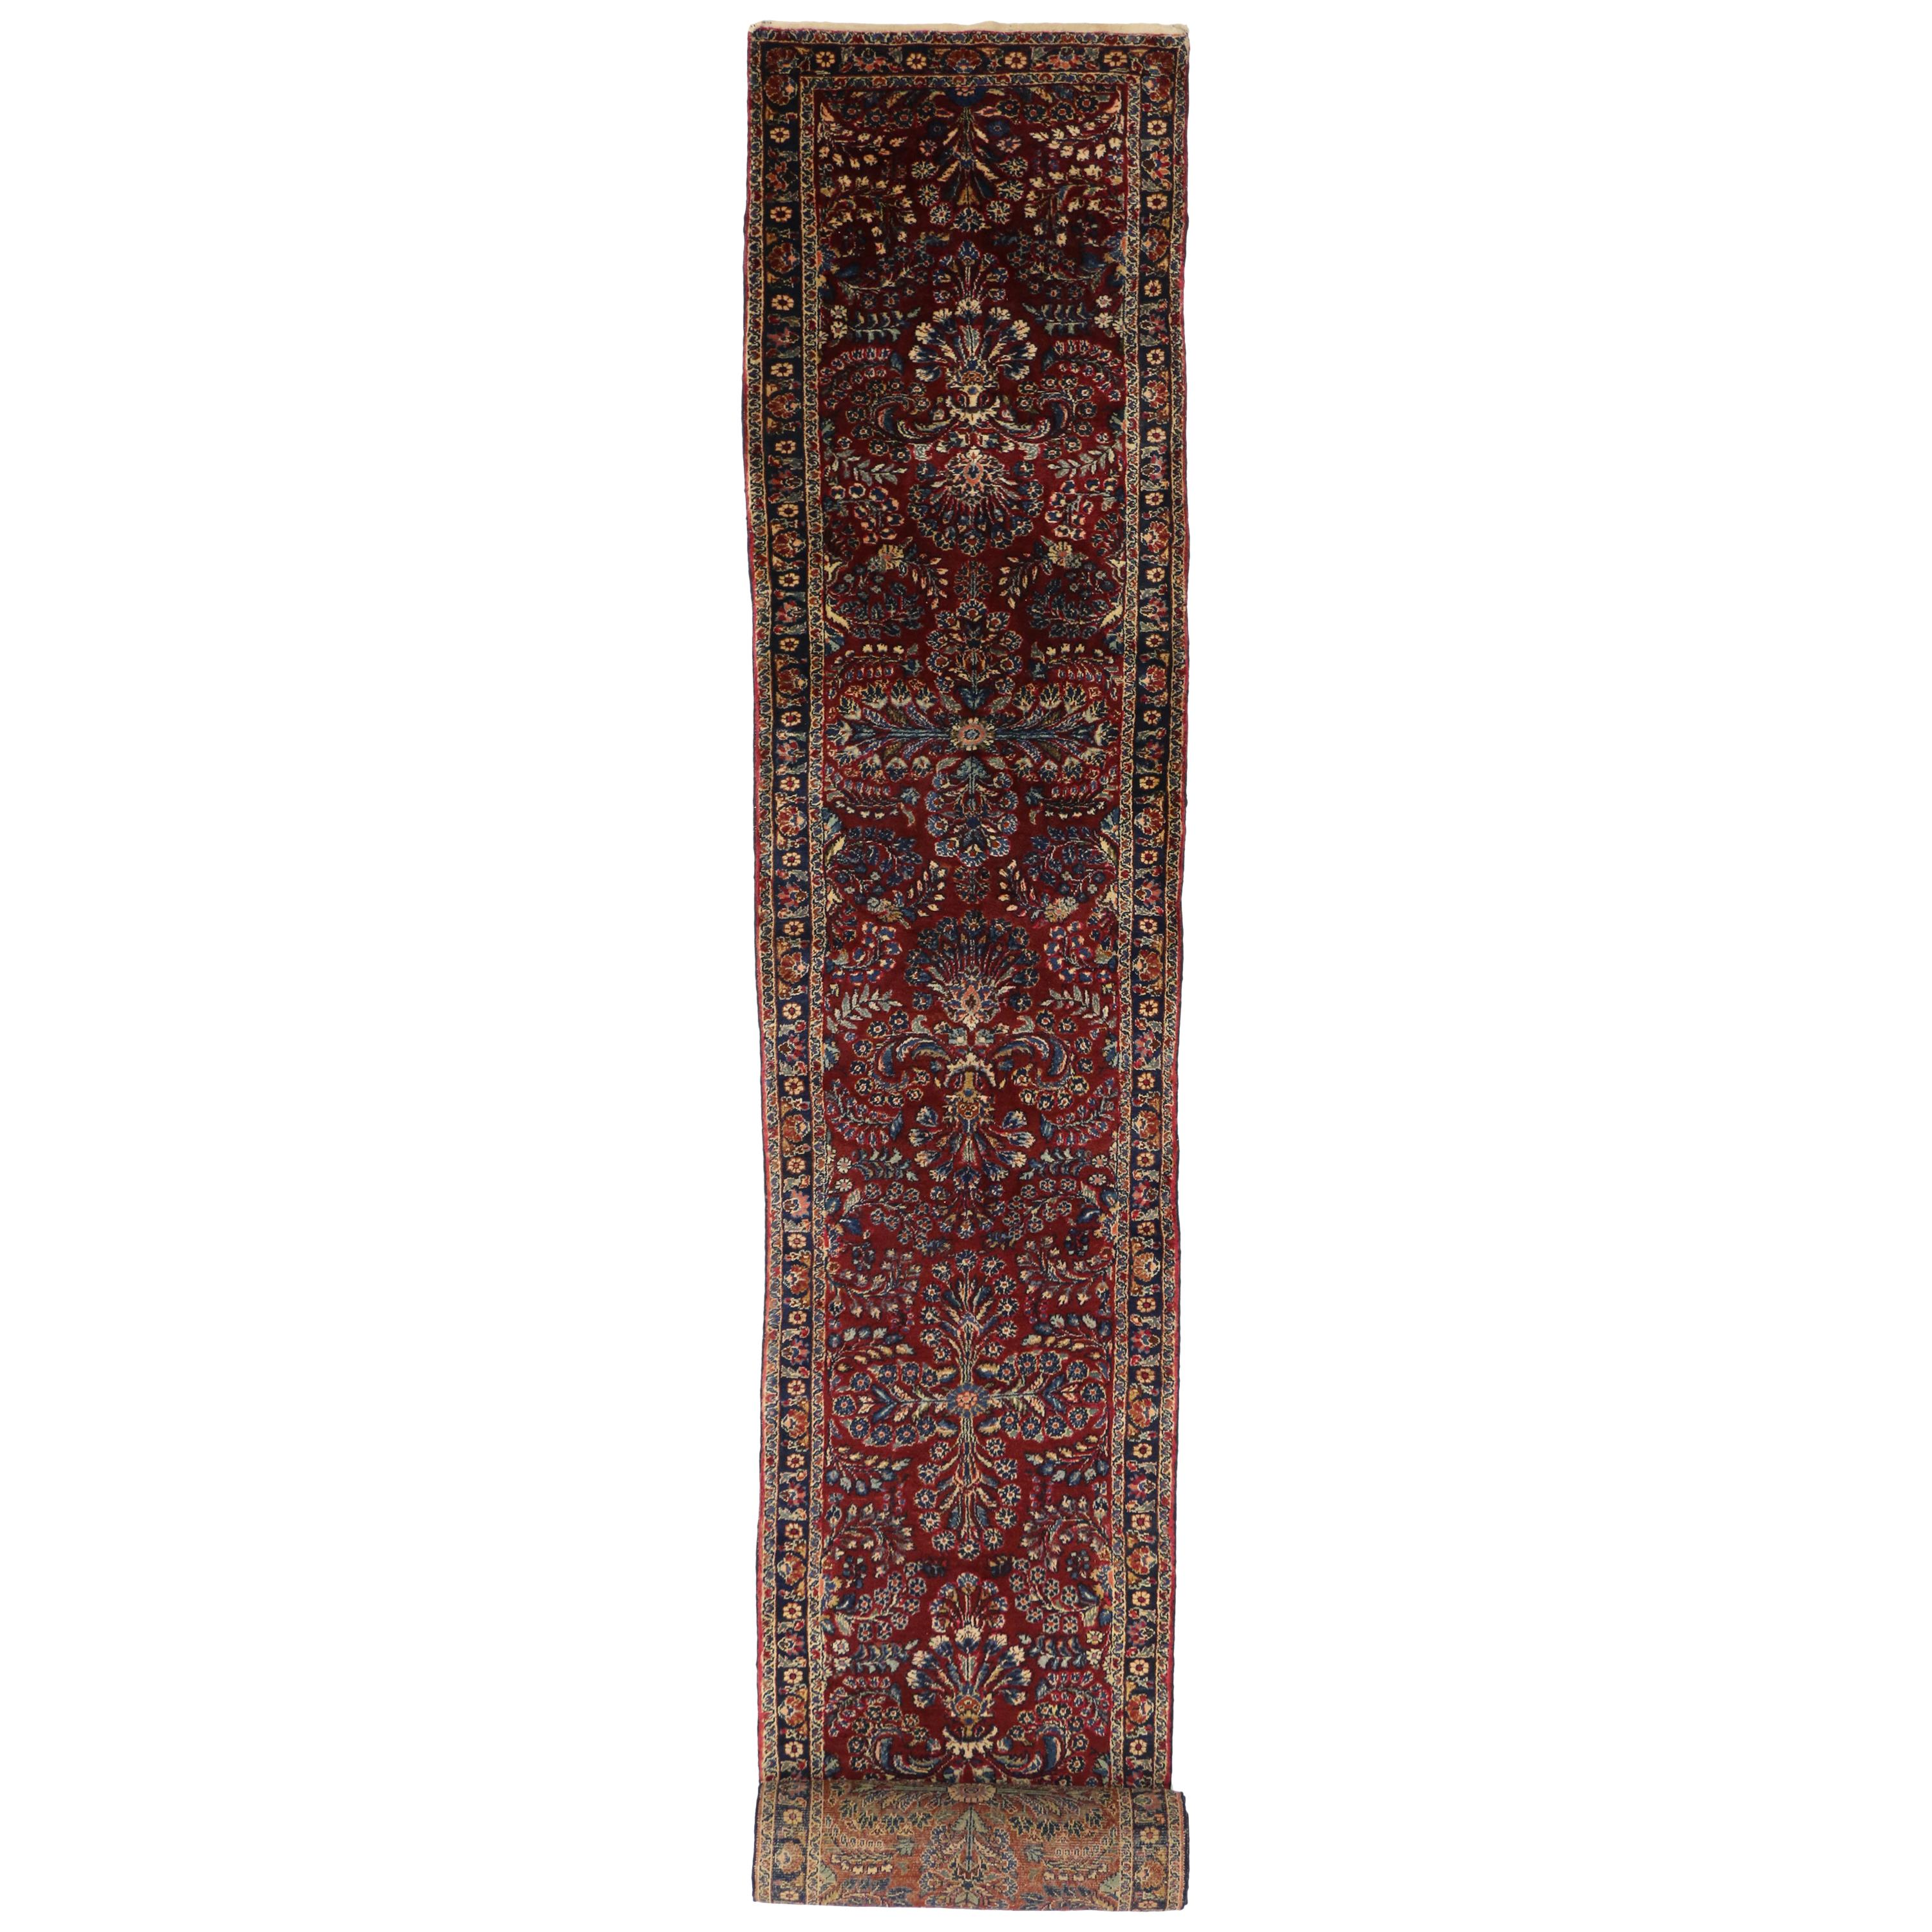 Antique Persian Lilihan Long Runner with Old World Regency Style